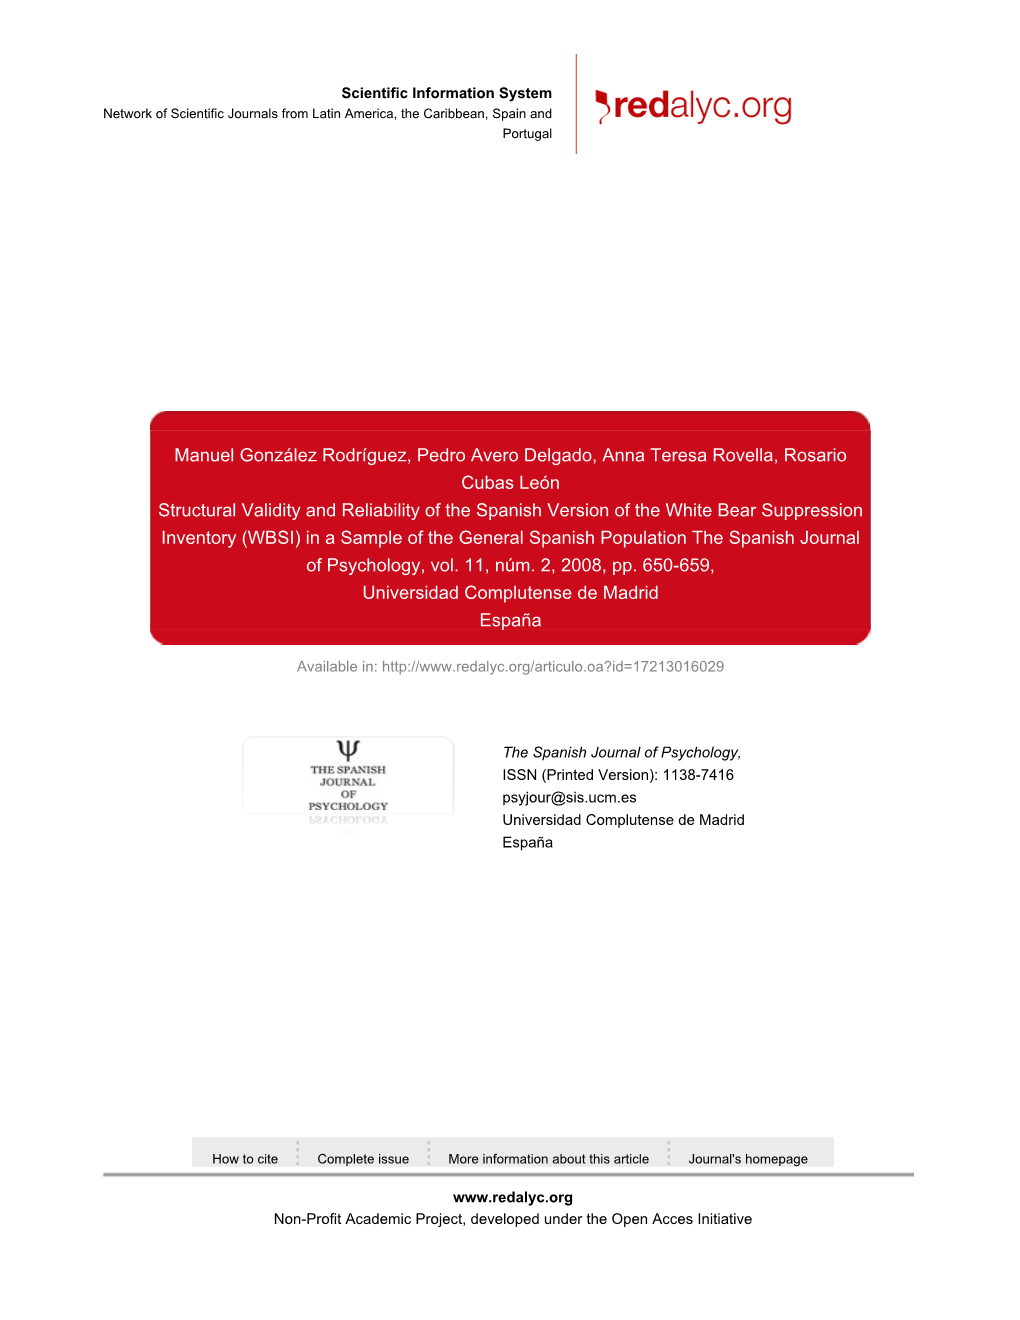 (WBSI) in a Sample of the General Spanish Population the Spanish Journal of Psychology, Vol